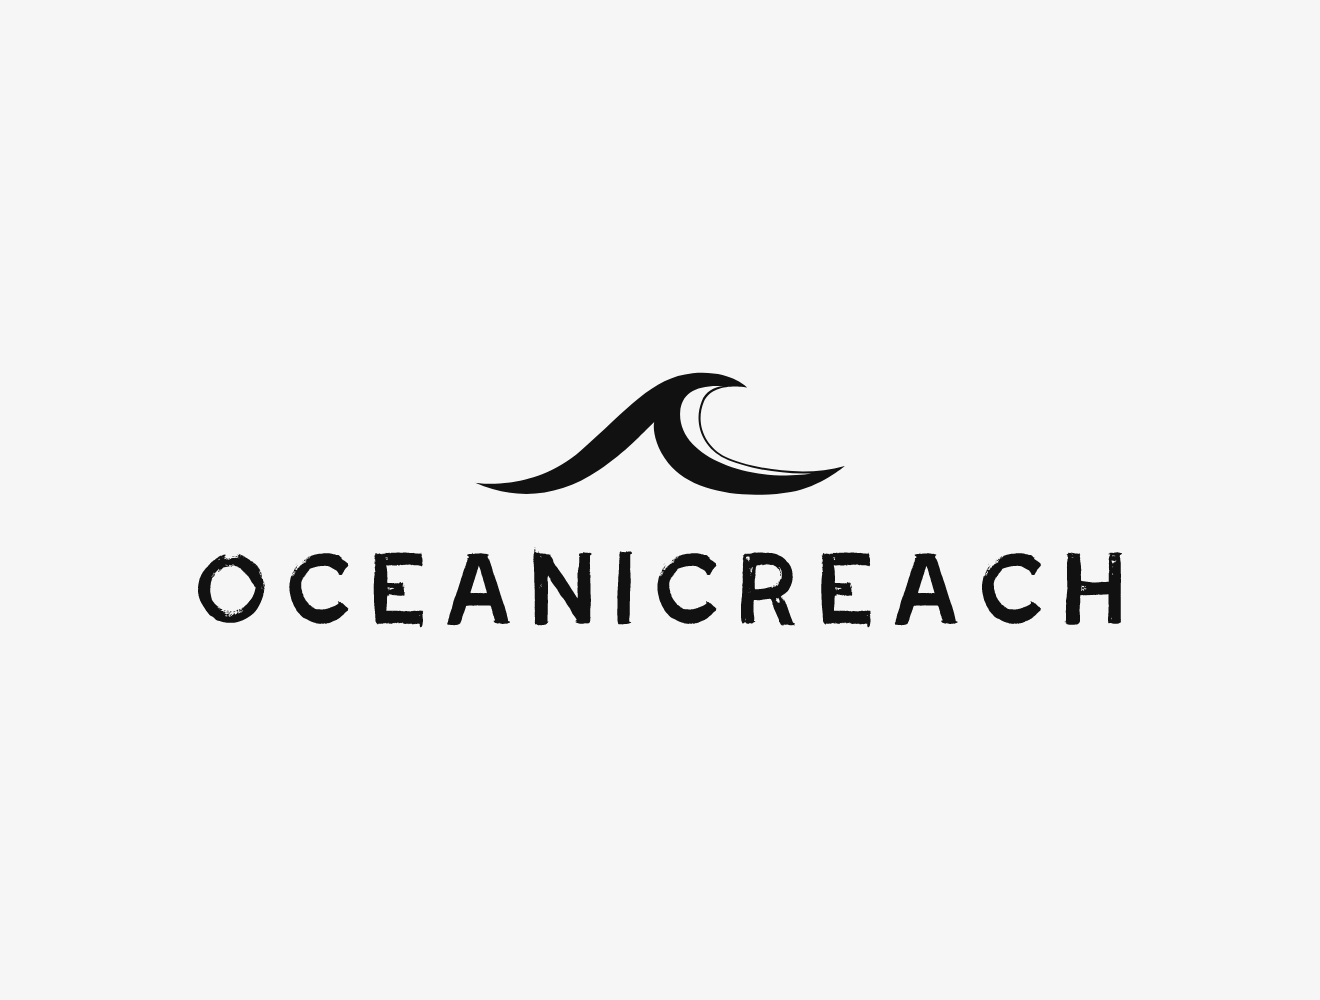 Oceanic Reach - Your Partner for Dental and Chiropractic Practice Growth